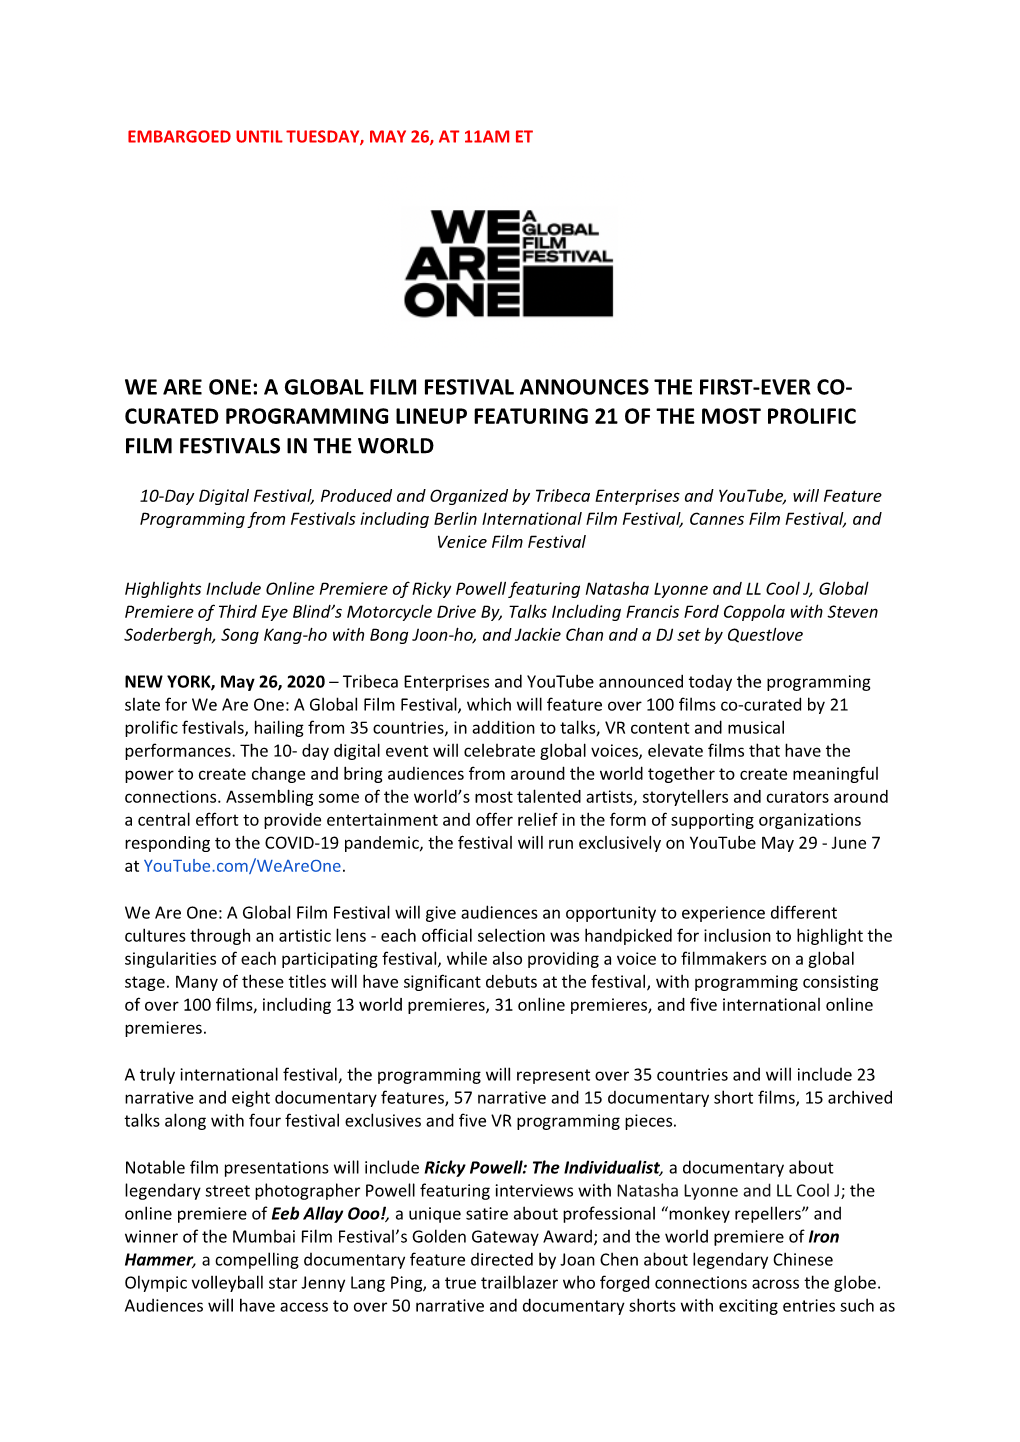 We Are One: a Global Film Festival Announce 27